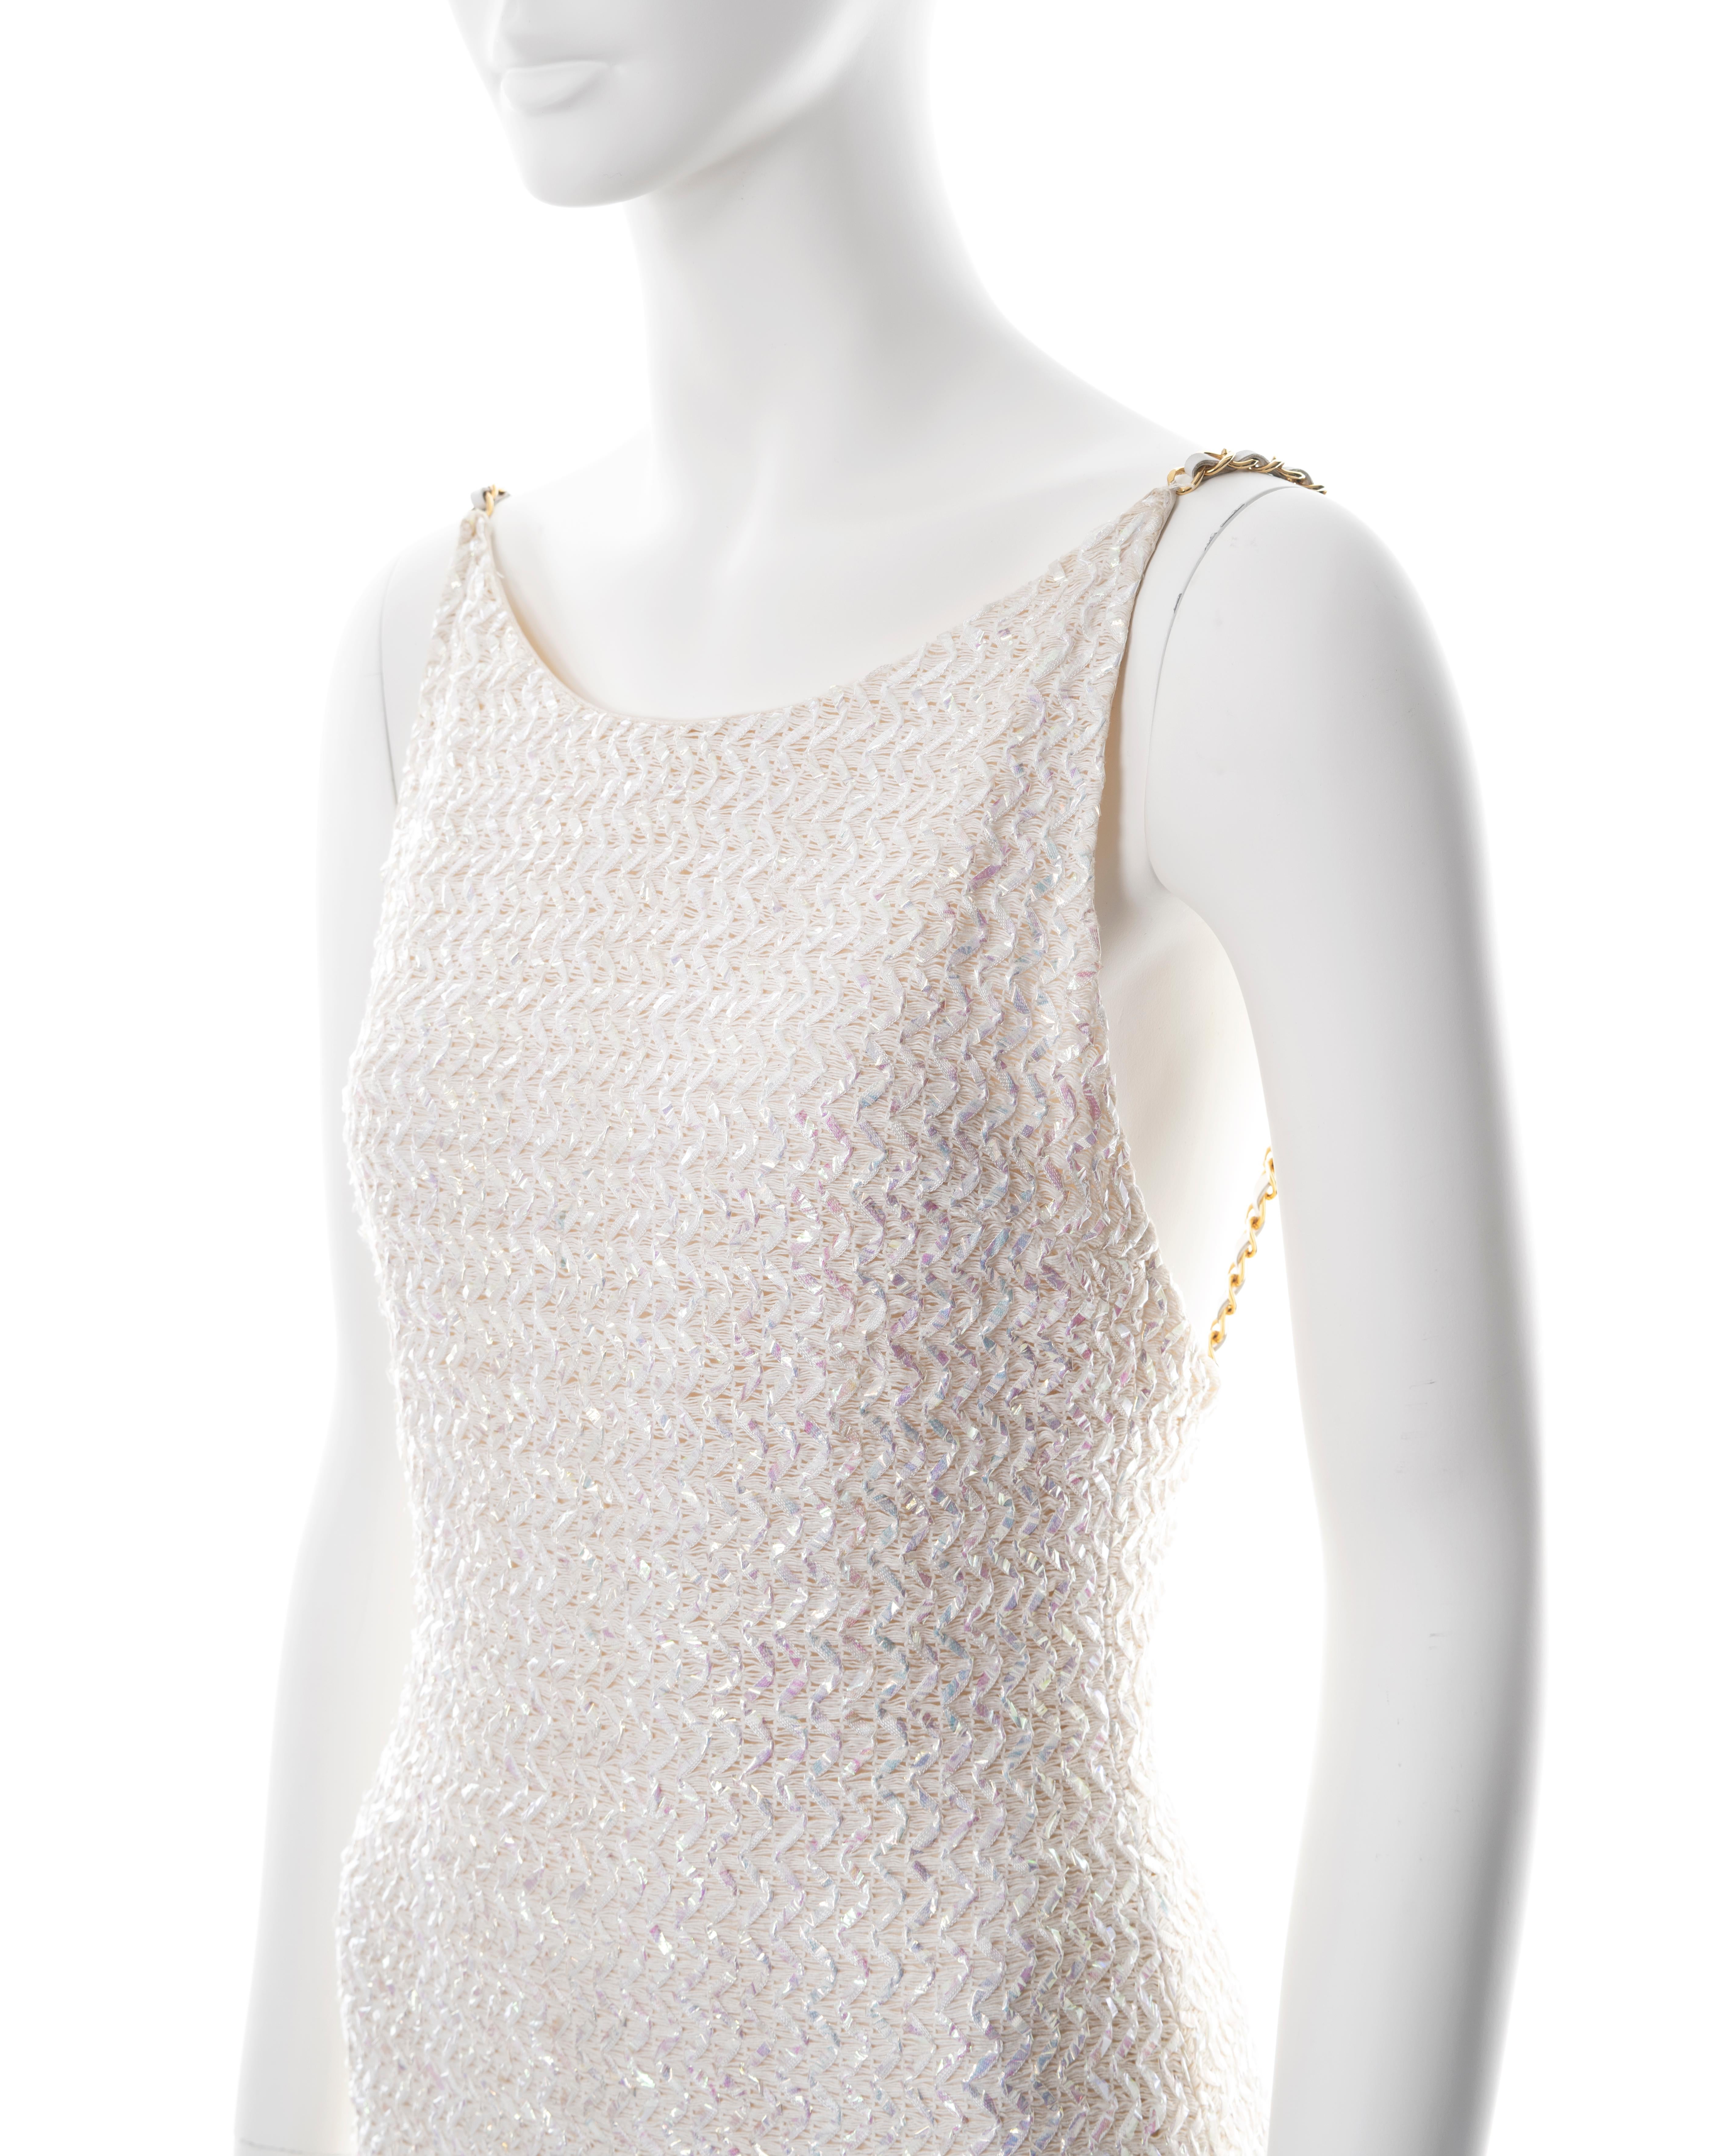 Women's Chanel by Karl Lagerfeld white tweed sheath dress with chain straps, ss 1992